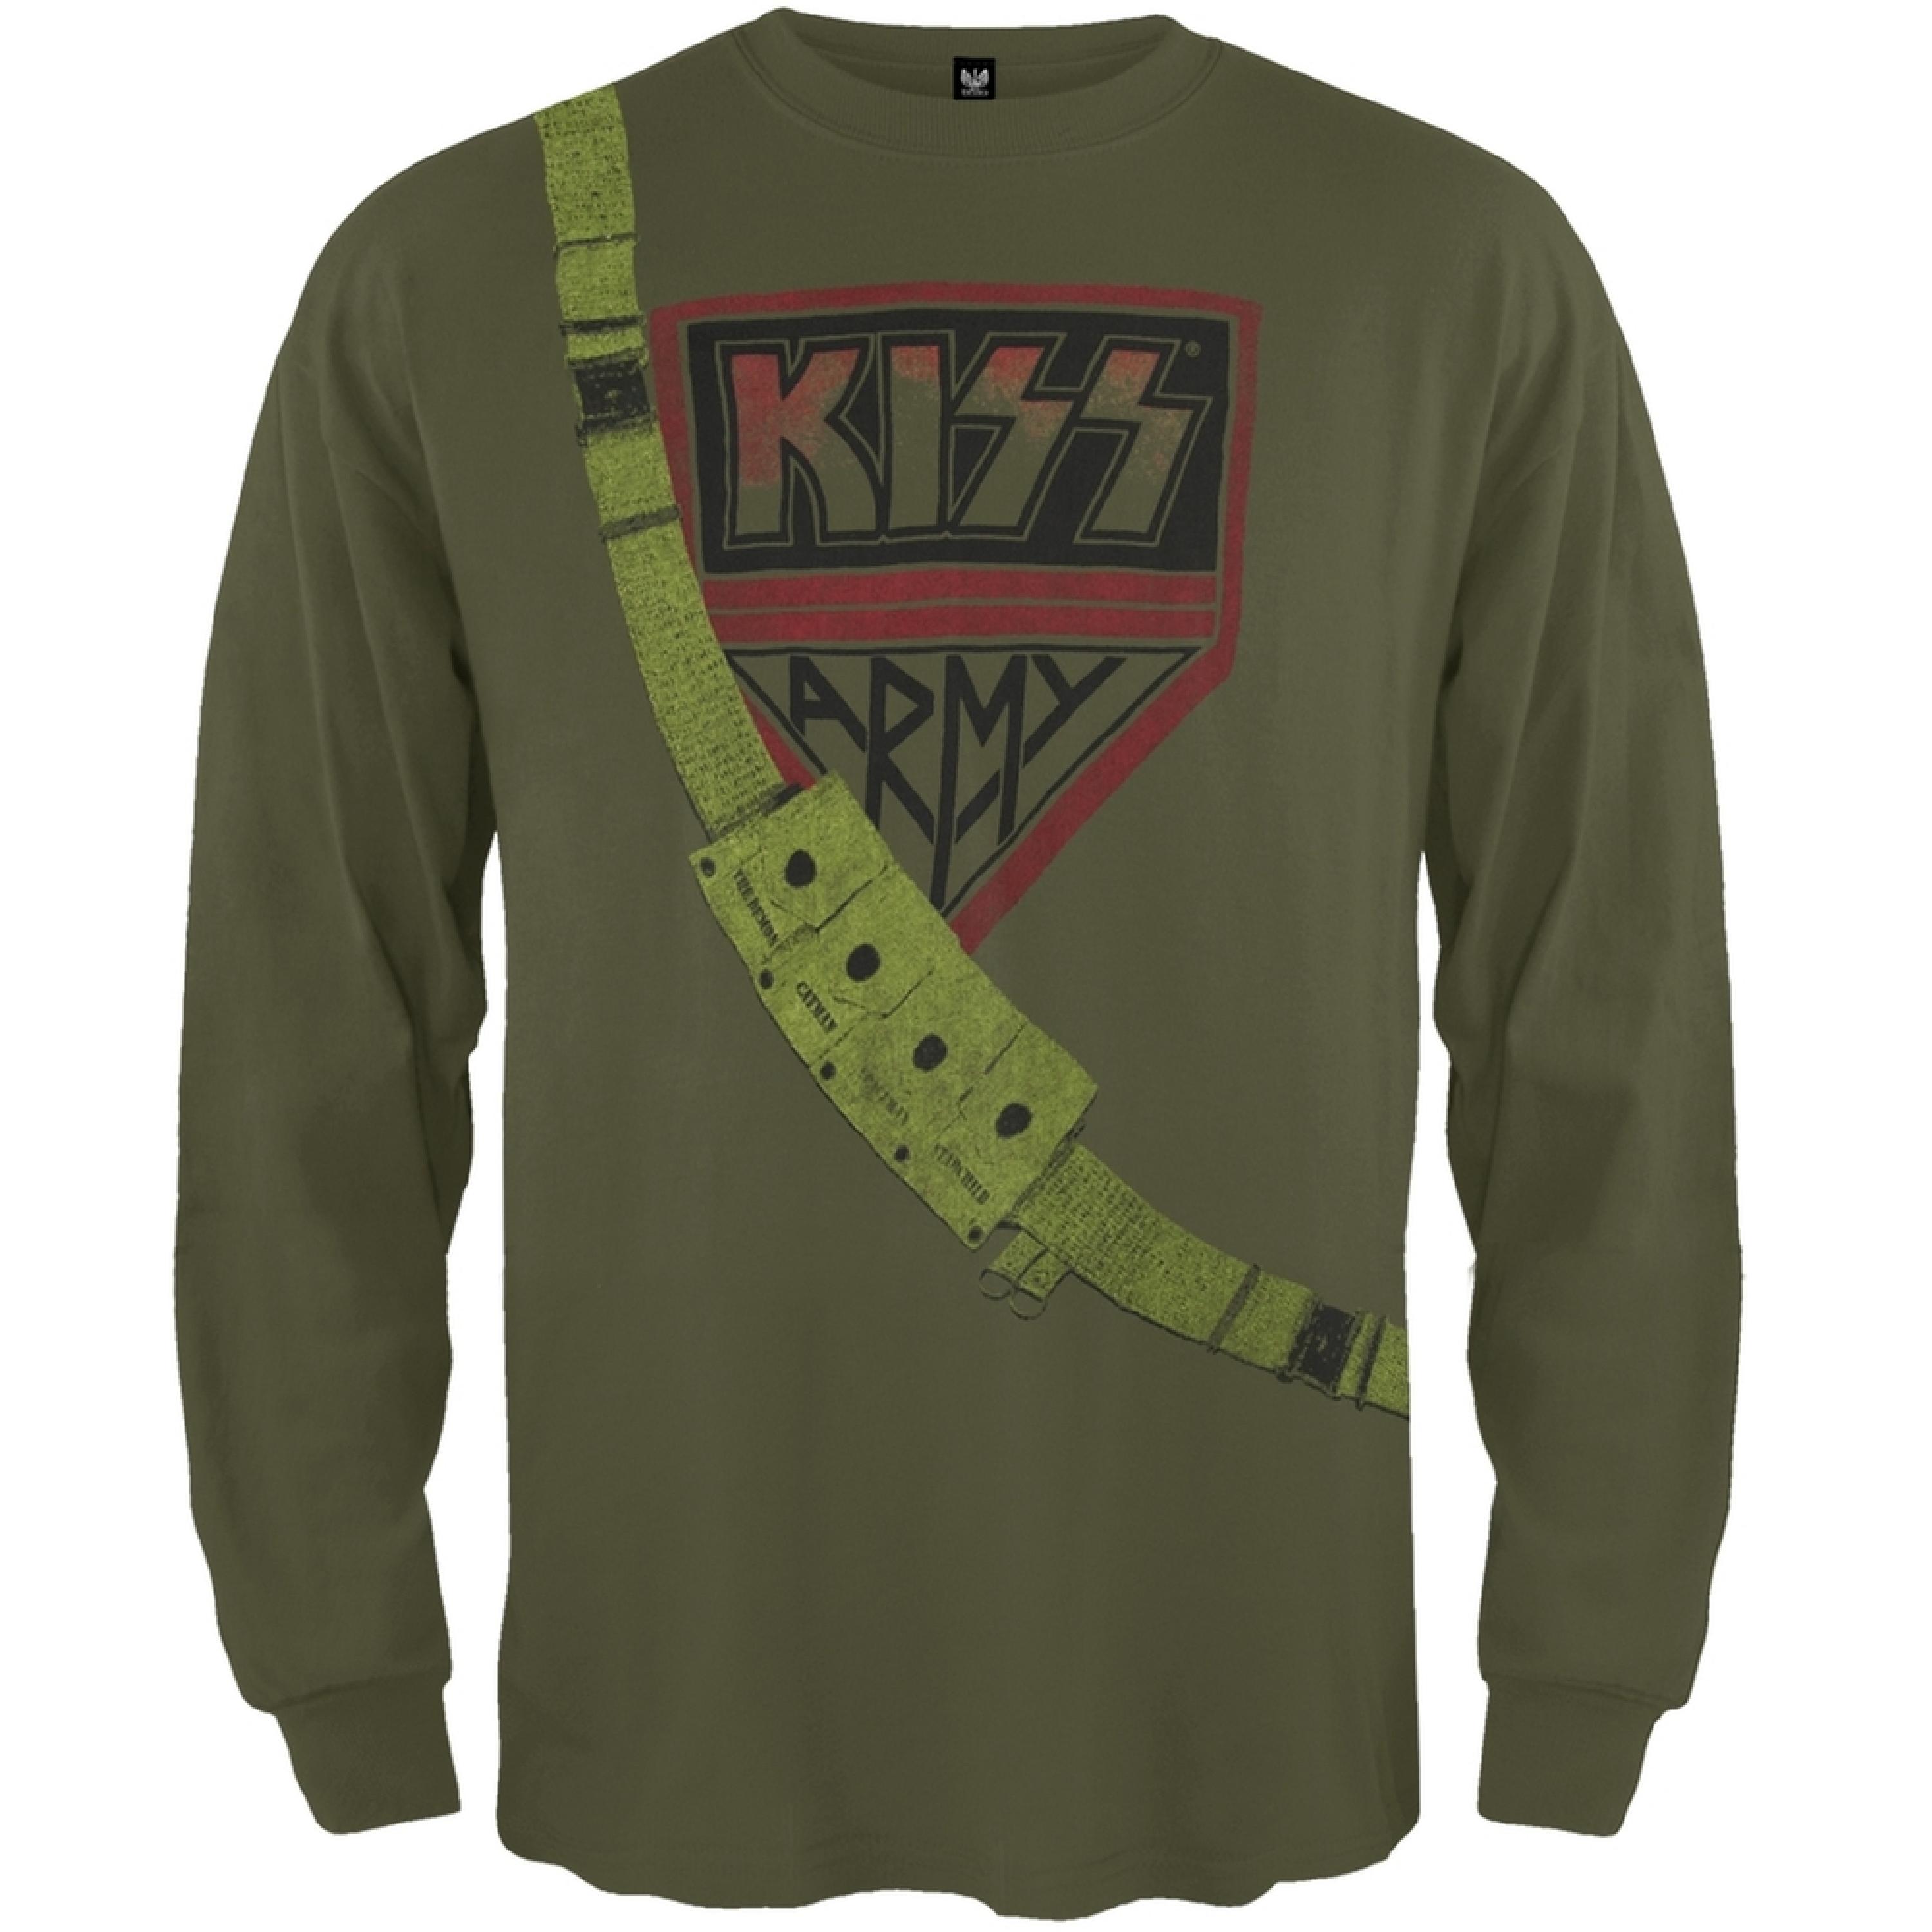 Army Premium Boys Youth Long Sleeve T-Shirt - image 1 of 1